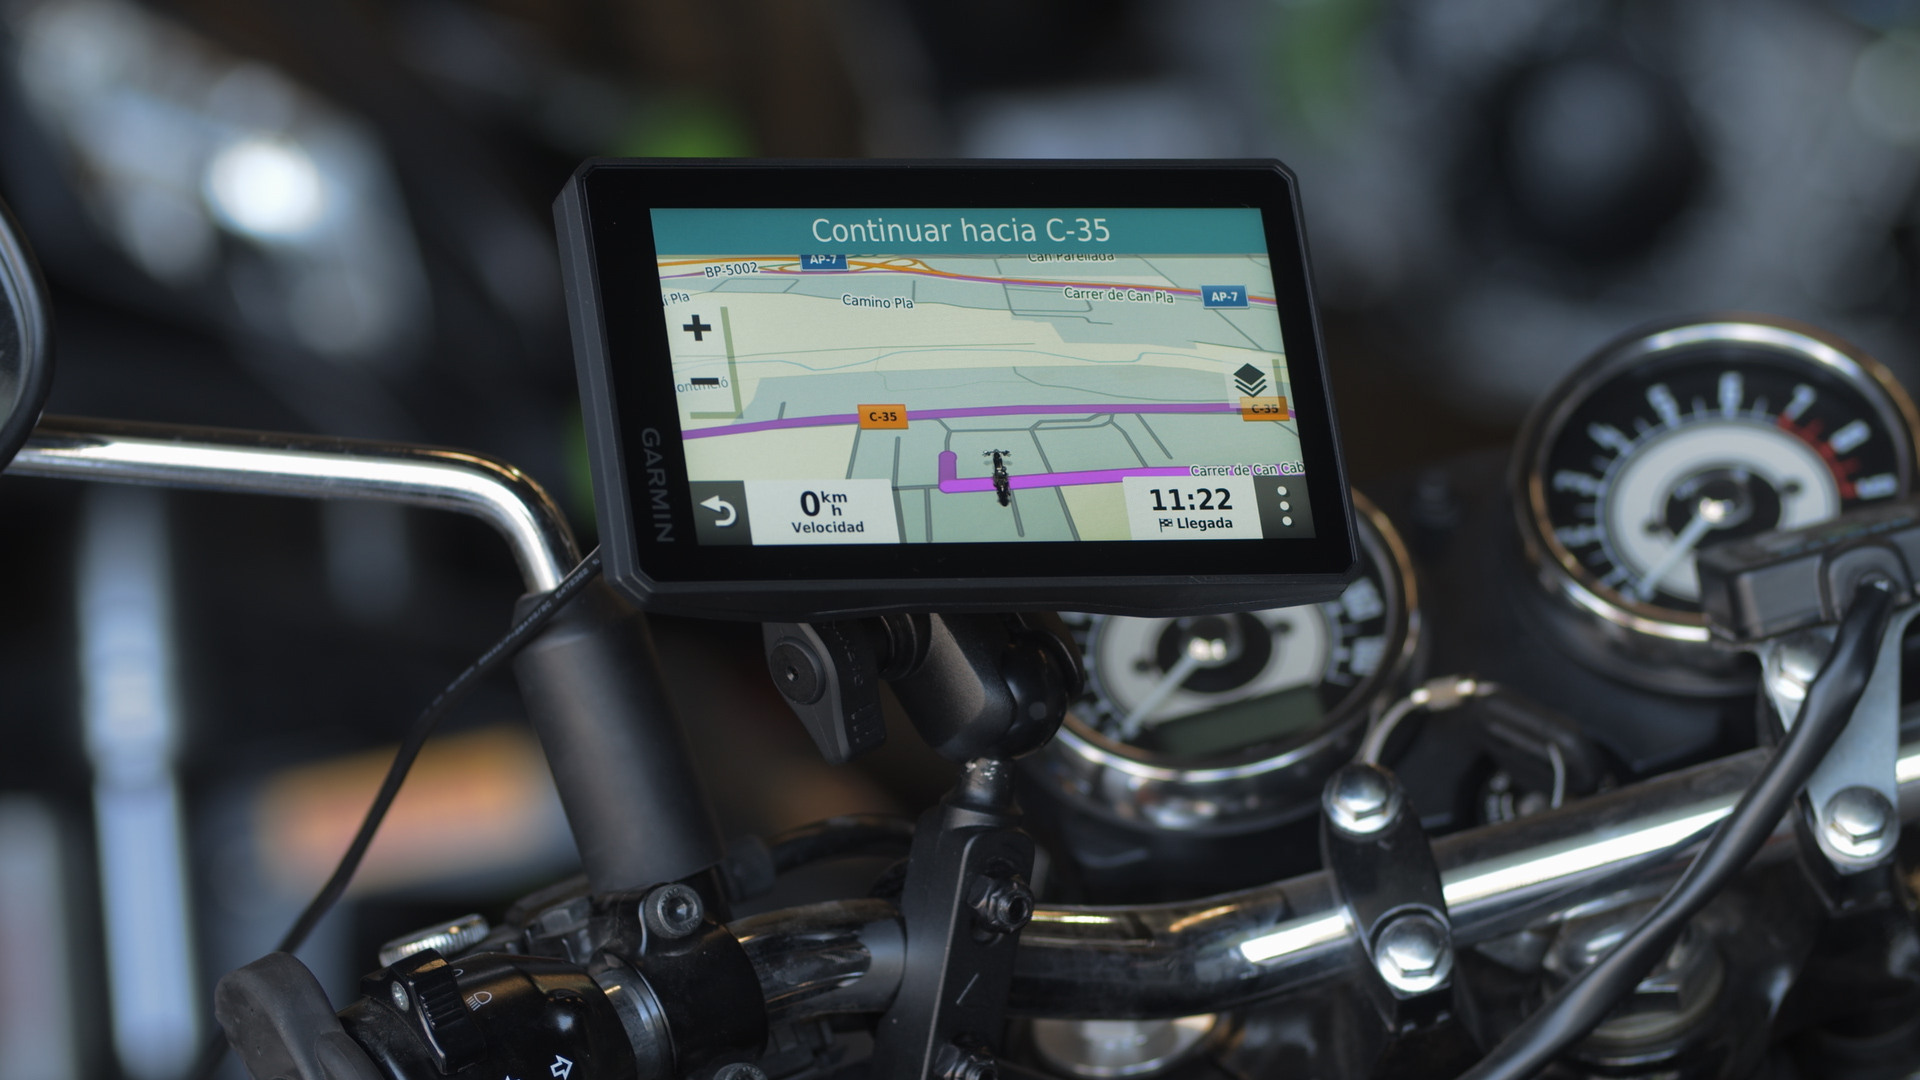 bewaker getuige Eerbetoon Review: Motorcycle GPS Garmin Zumo XT: review and analysis of its features  · Motocard